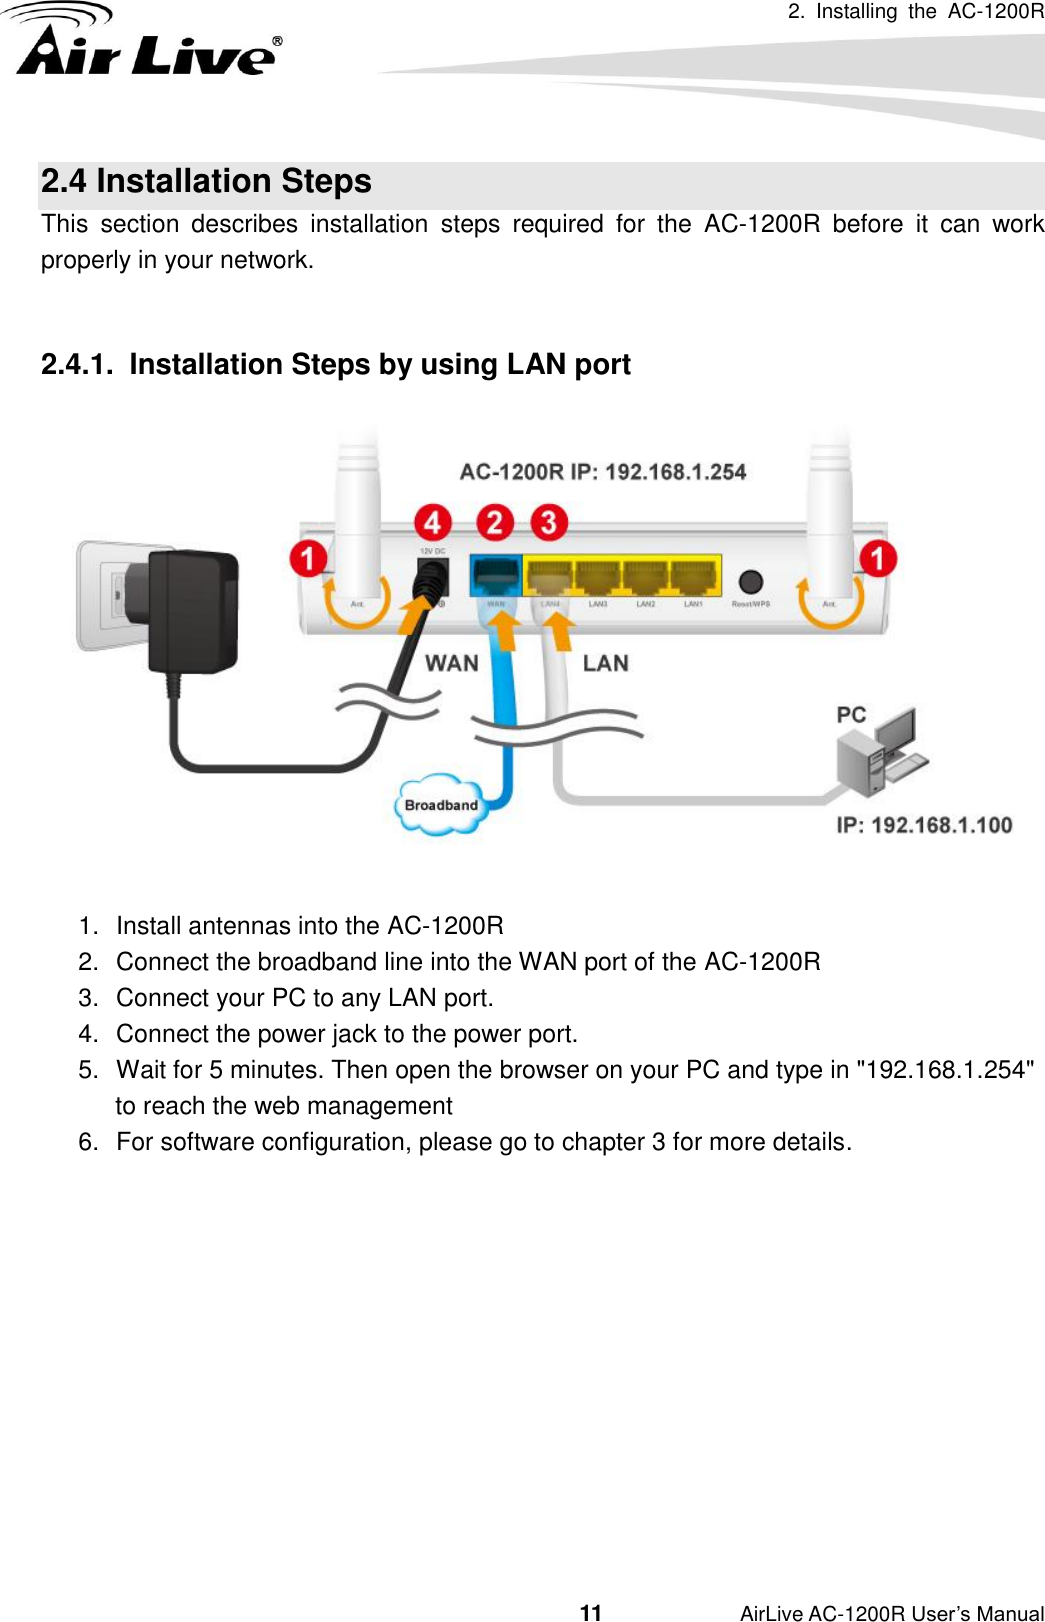 2.  Installing  the  AC-1200R                                         11           AirLive AC-1200R User’s Manual 2.4 Installation Steps   This  section  describes  installation  steps  required  for  the  AC-1200R  before  it  can  work properly in your network.    2.4.1.   Installation Steps by using LAN port   1.  Install antennas into the AC-1200R   2.  Connect the broadband line into the WAN port of the AC-1200R   3.  Connect your PC to any LAN port.   4.  Connect the power jack to the power port.   5.  Wait for 5 minutes. Then open the browser on your PC and type in &quot;192.168.1.254&quot; to reach the web management   6.  For software configuration, please go to chapter 3 for more details.  